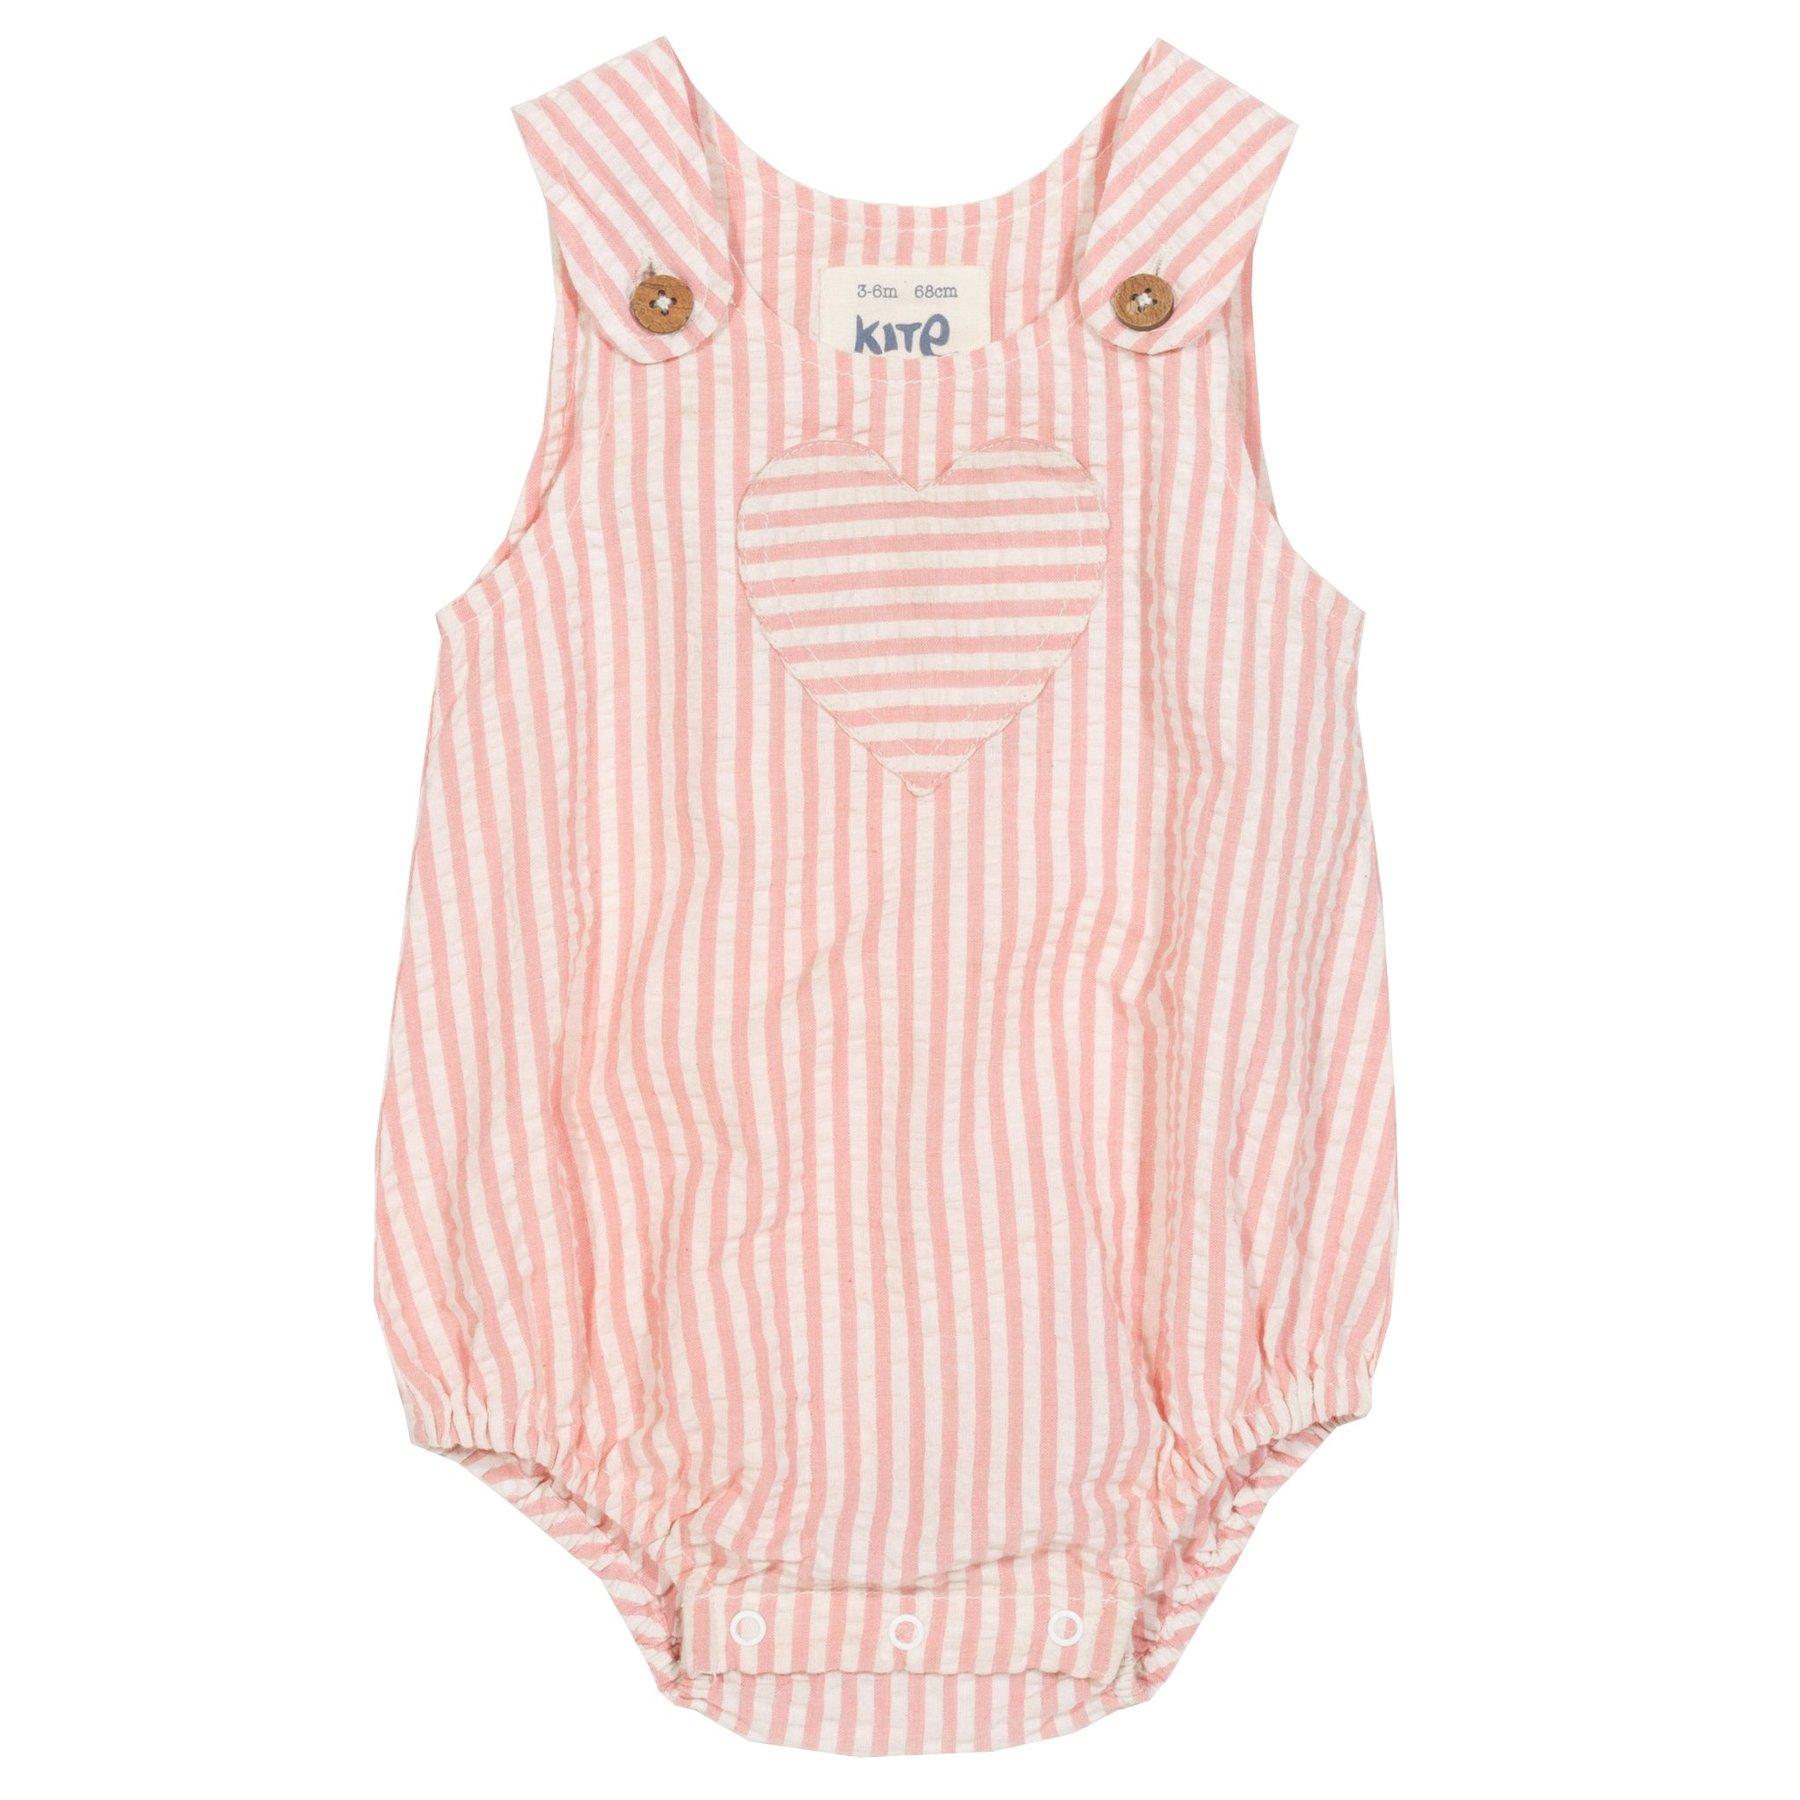 Kite Clothing Heart Bubble Romper front